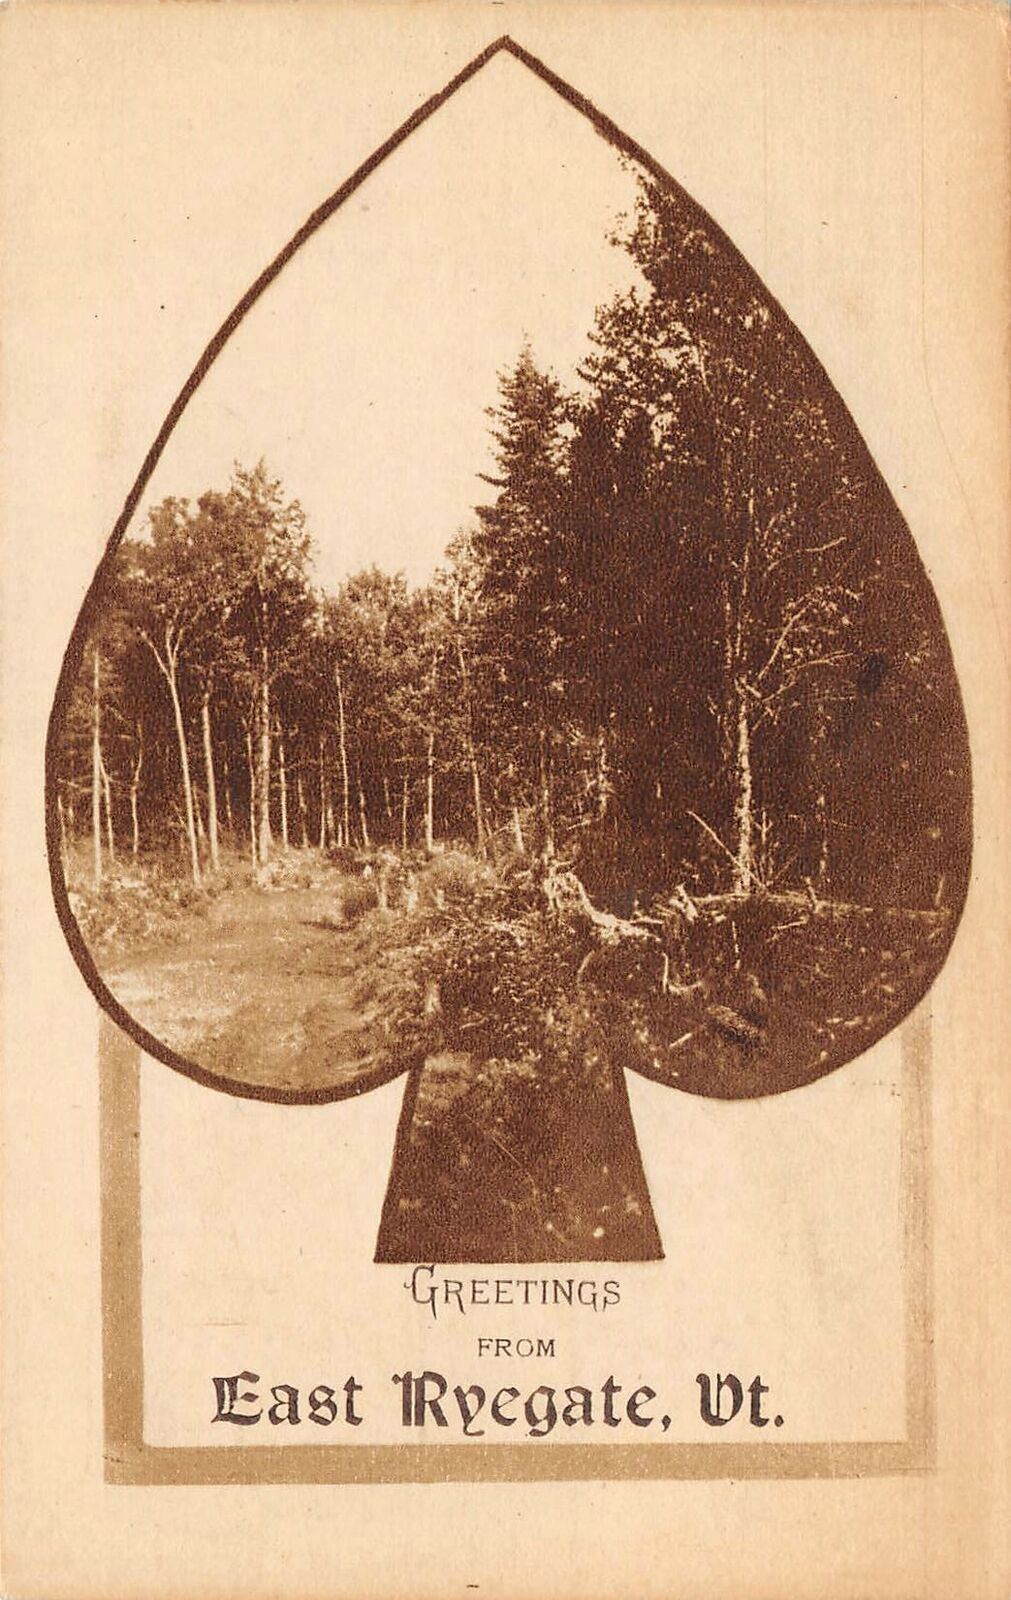 EAST RYEGATE Vermont postcard Greetings from spade shape forest